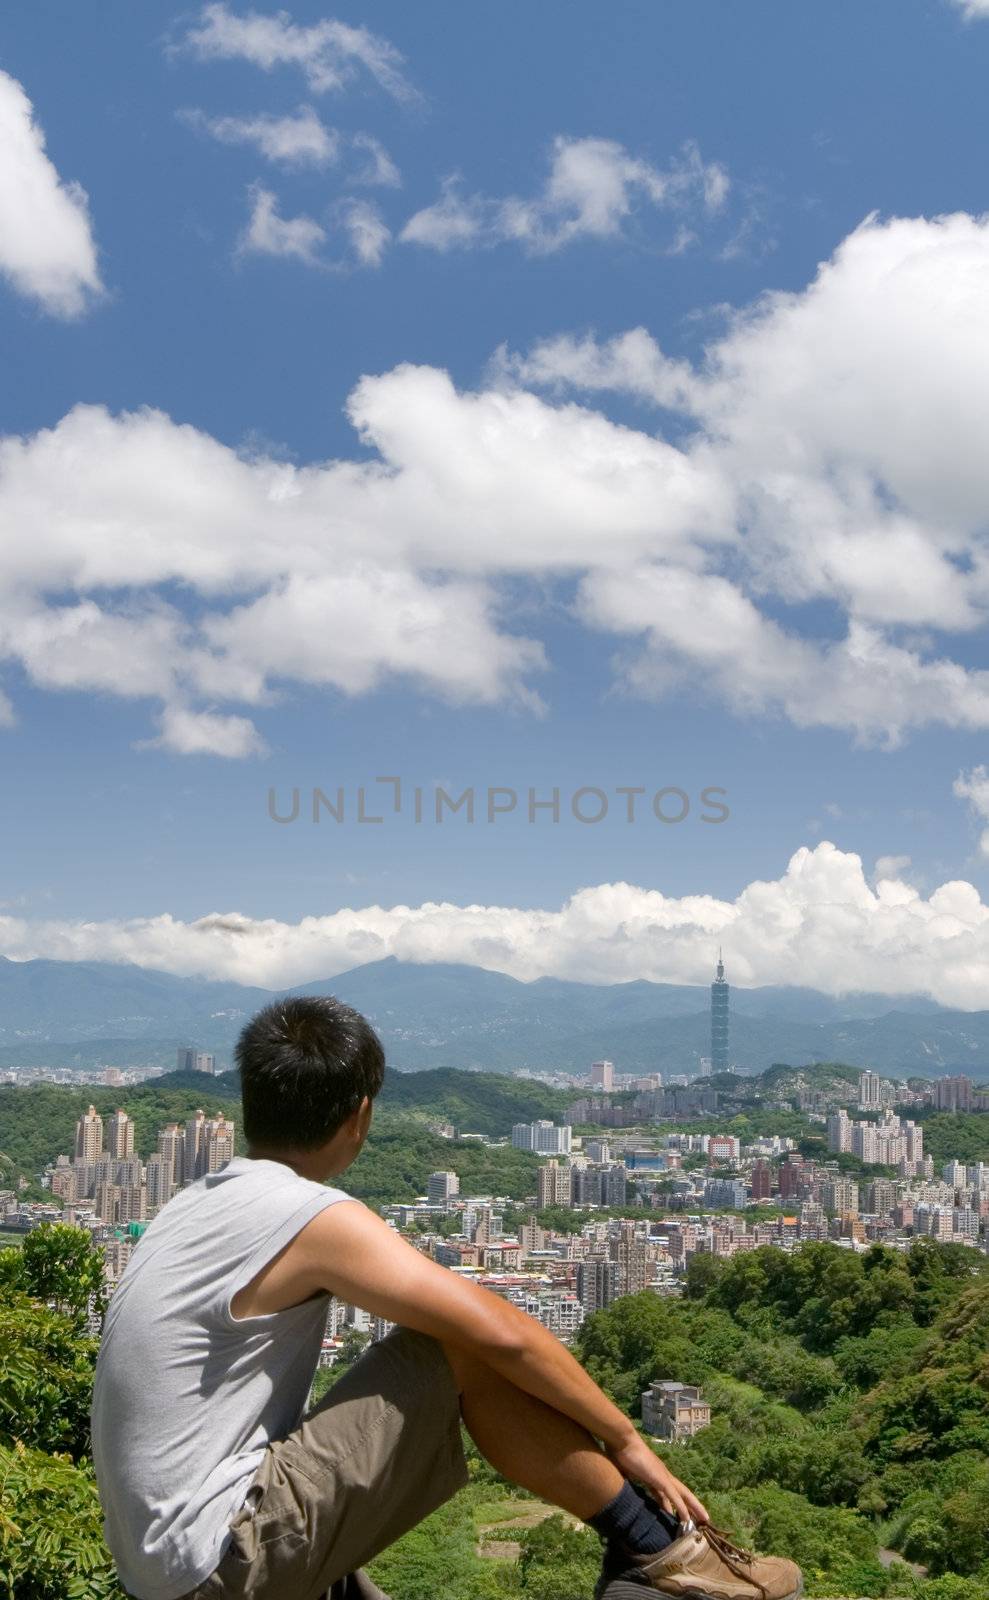 It is a beautiful cityscape in Asia of Taipei.